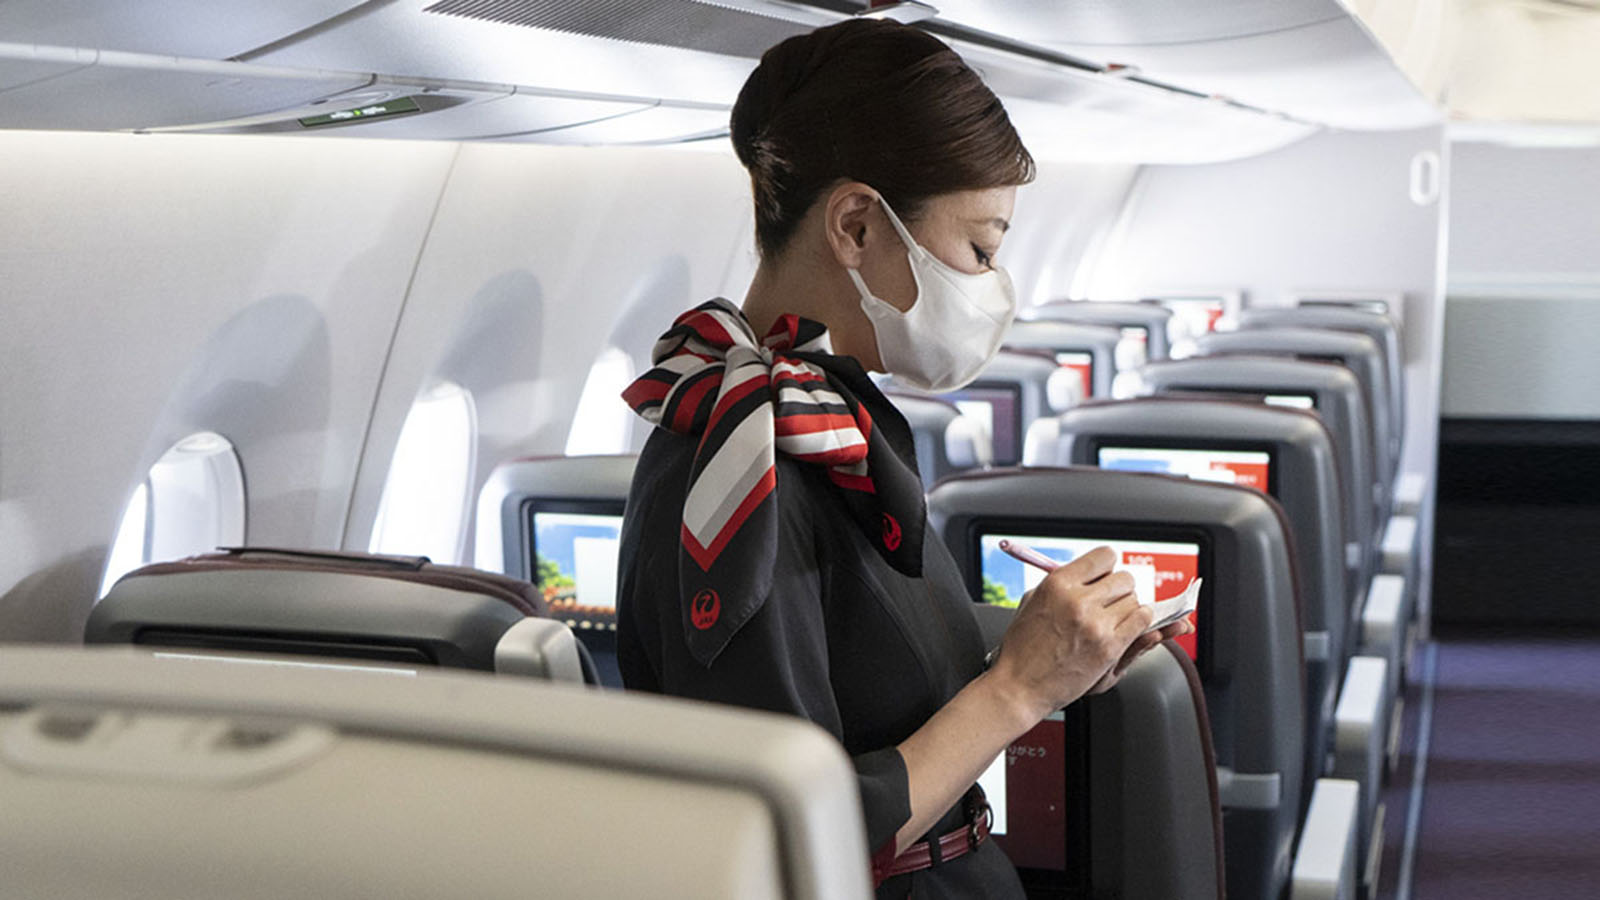 Japan Airlines Economy Class